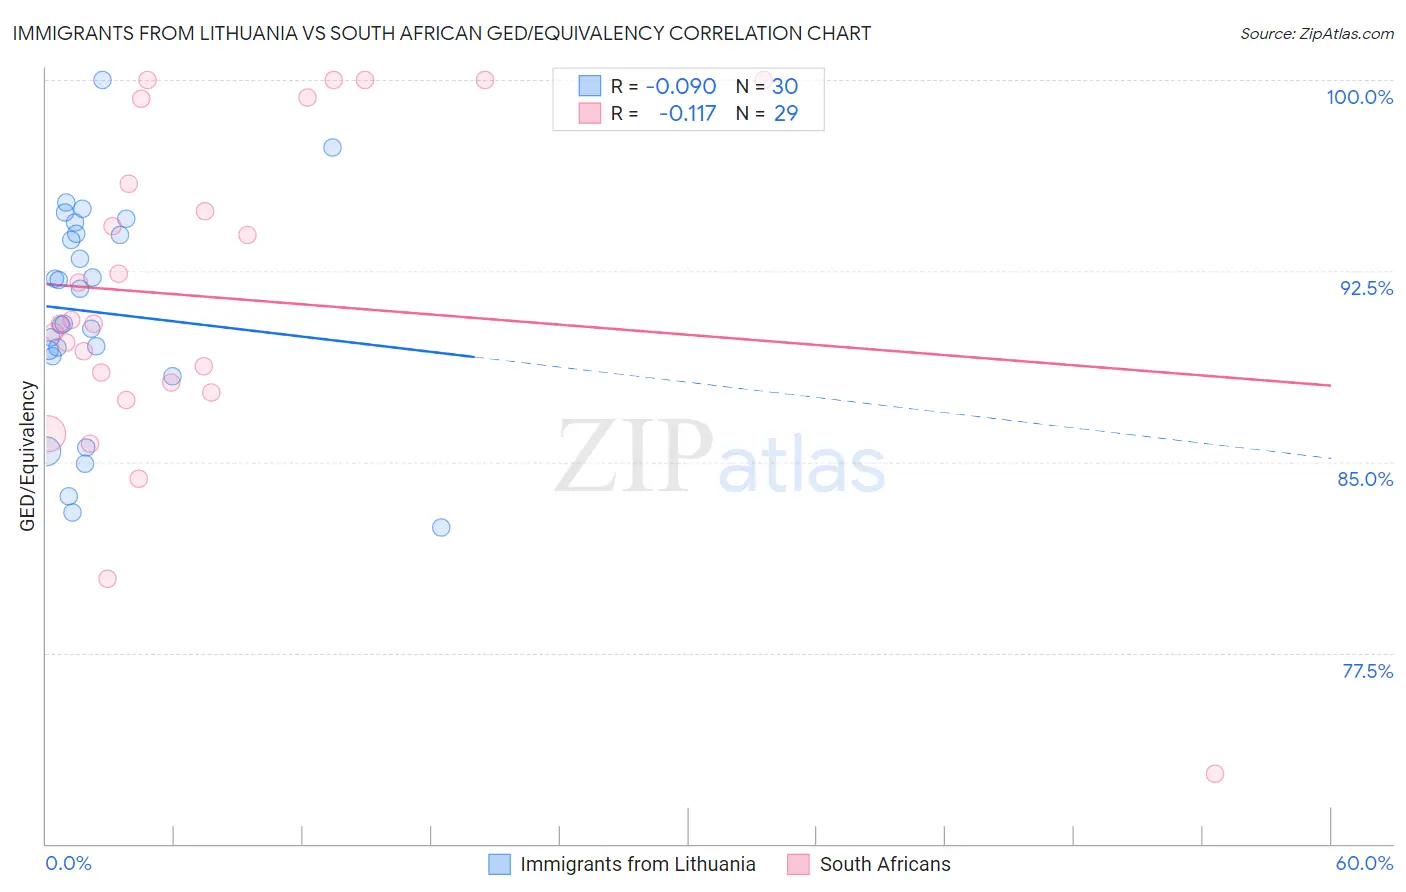 Immigrants from Lithuania vs South African GED/Equivalency